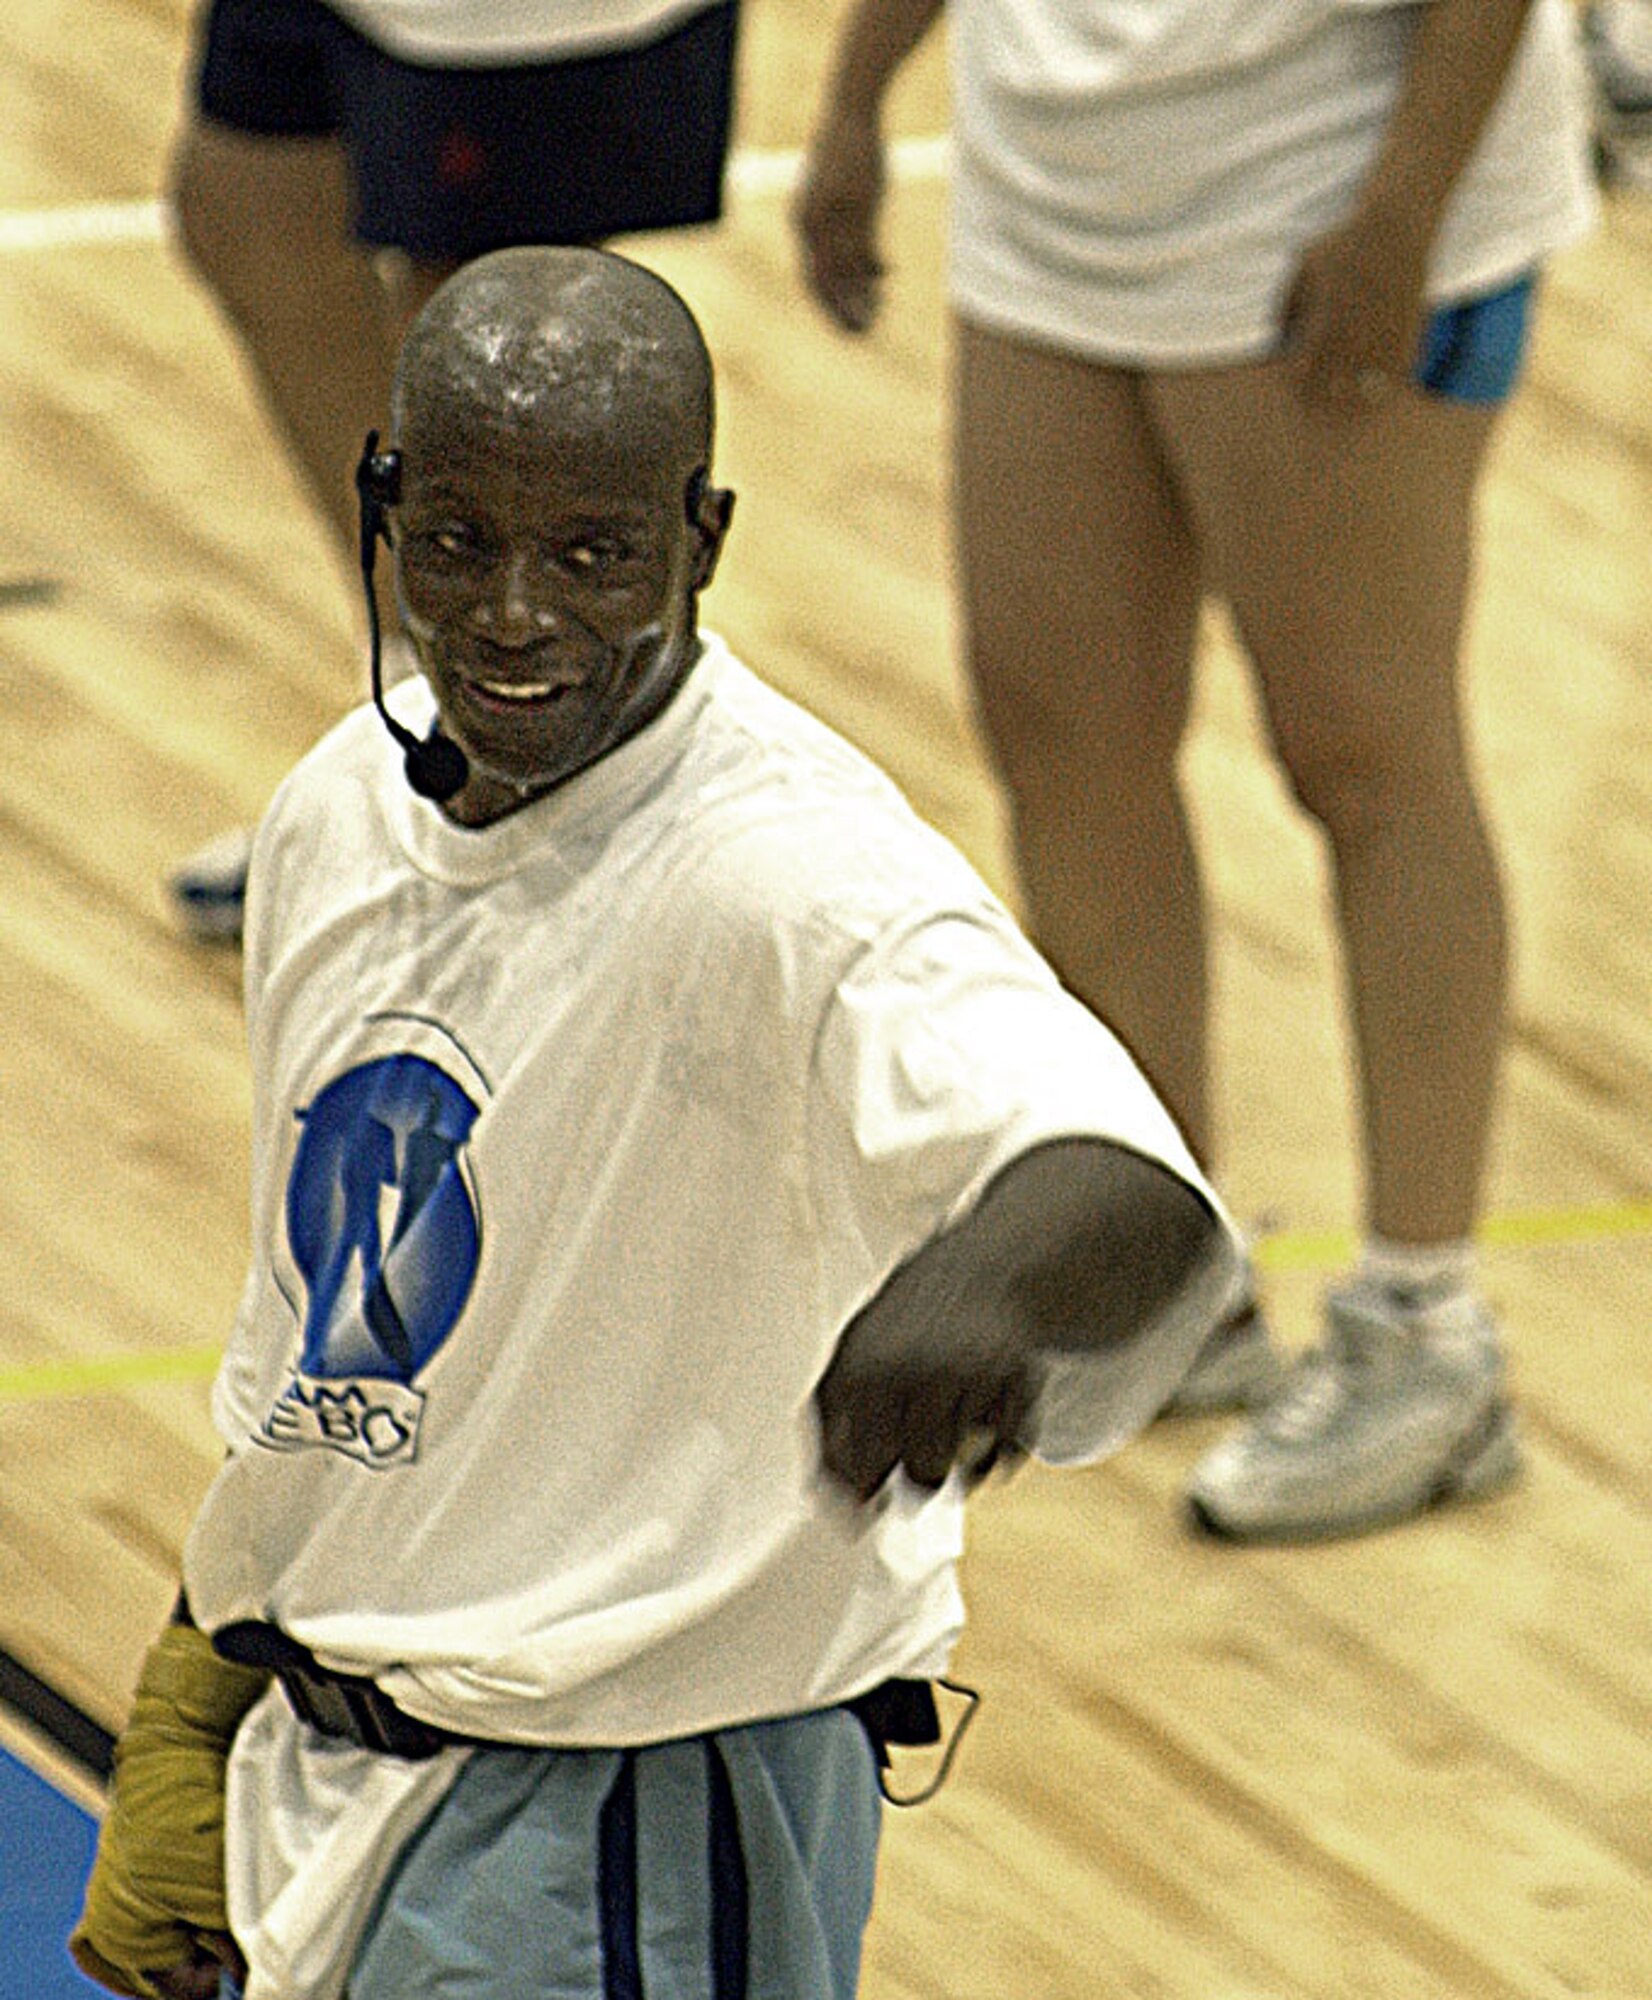 Tae Bo creator Billy Blanks teaches some at-home moves